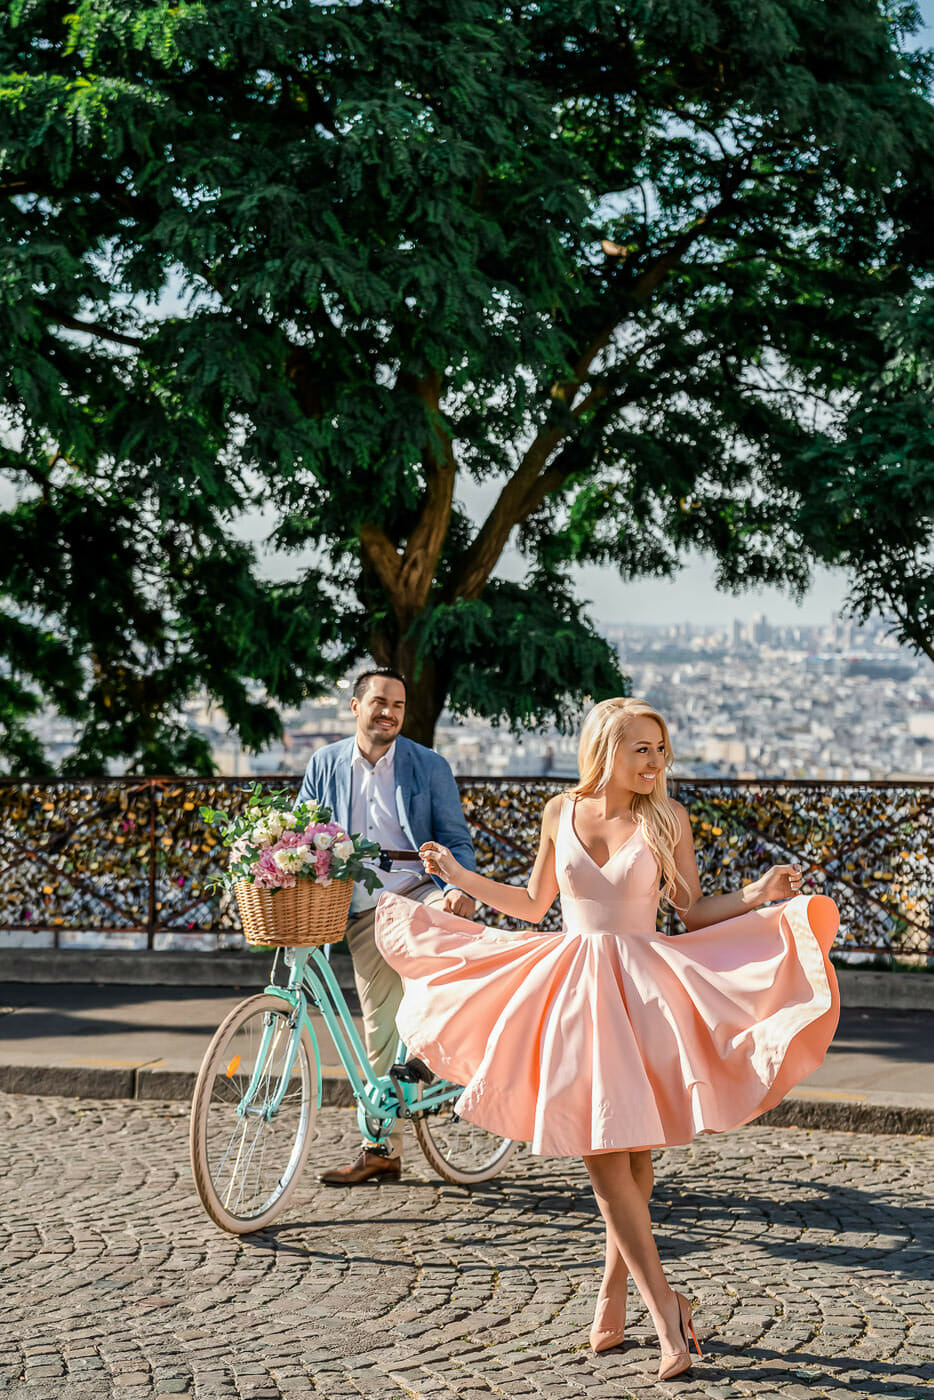 Fun couple photoshoot at Montmartre Paris with a rental bike and flowers